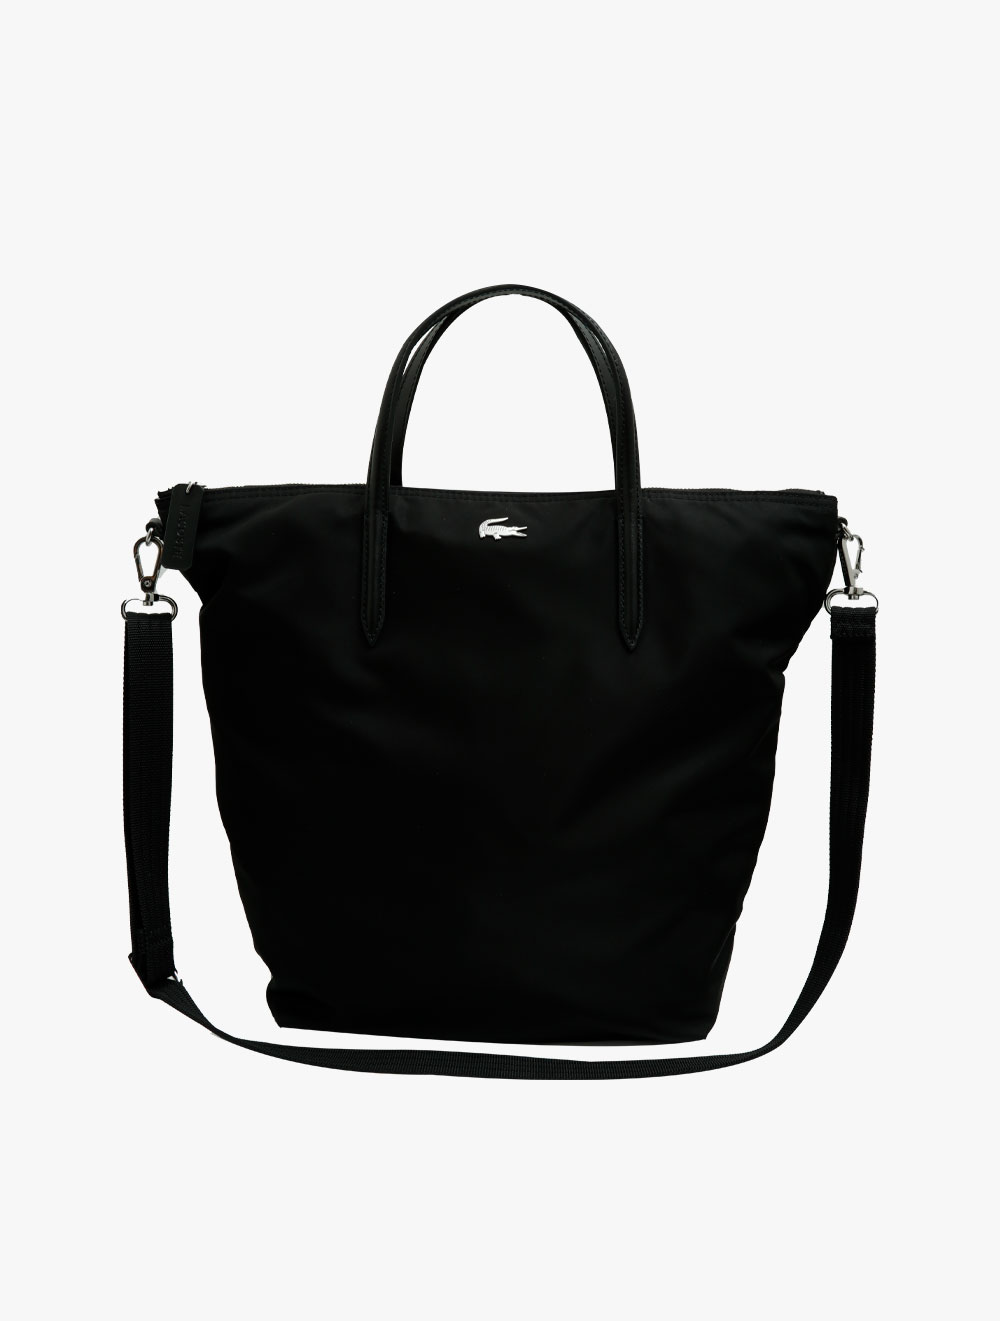 lacoste bags new arrival 2019